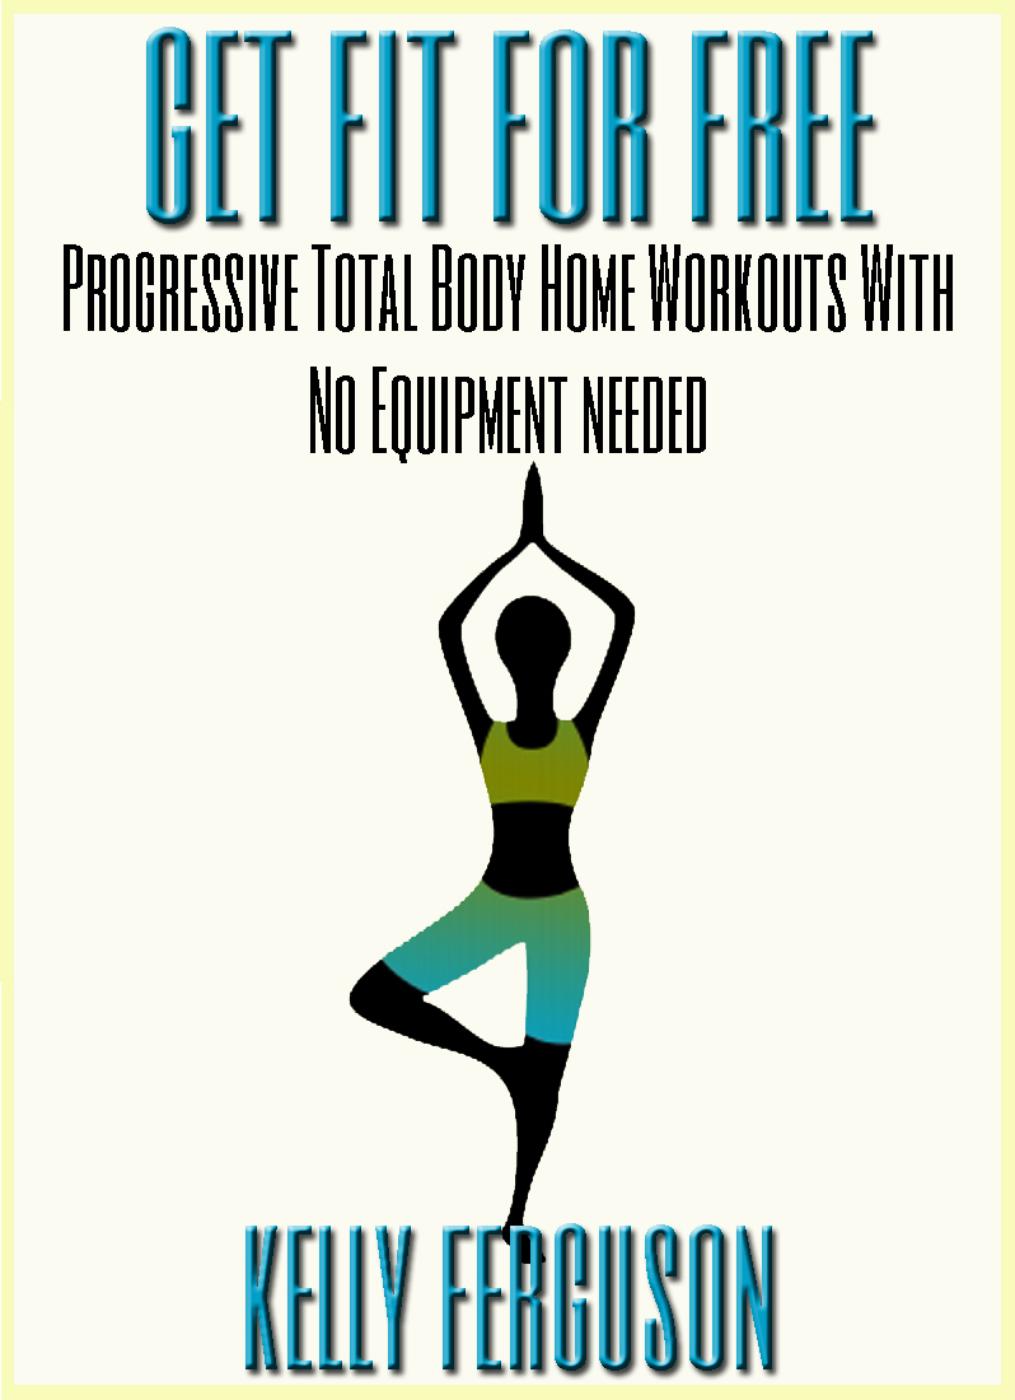 Get Fit For Free: Progressive Total Body Home Workouts With No Equipment Needed